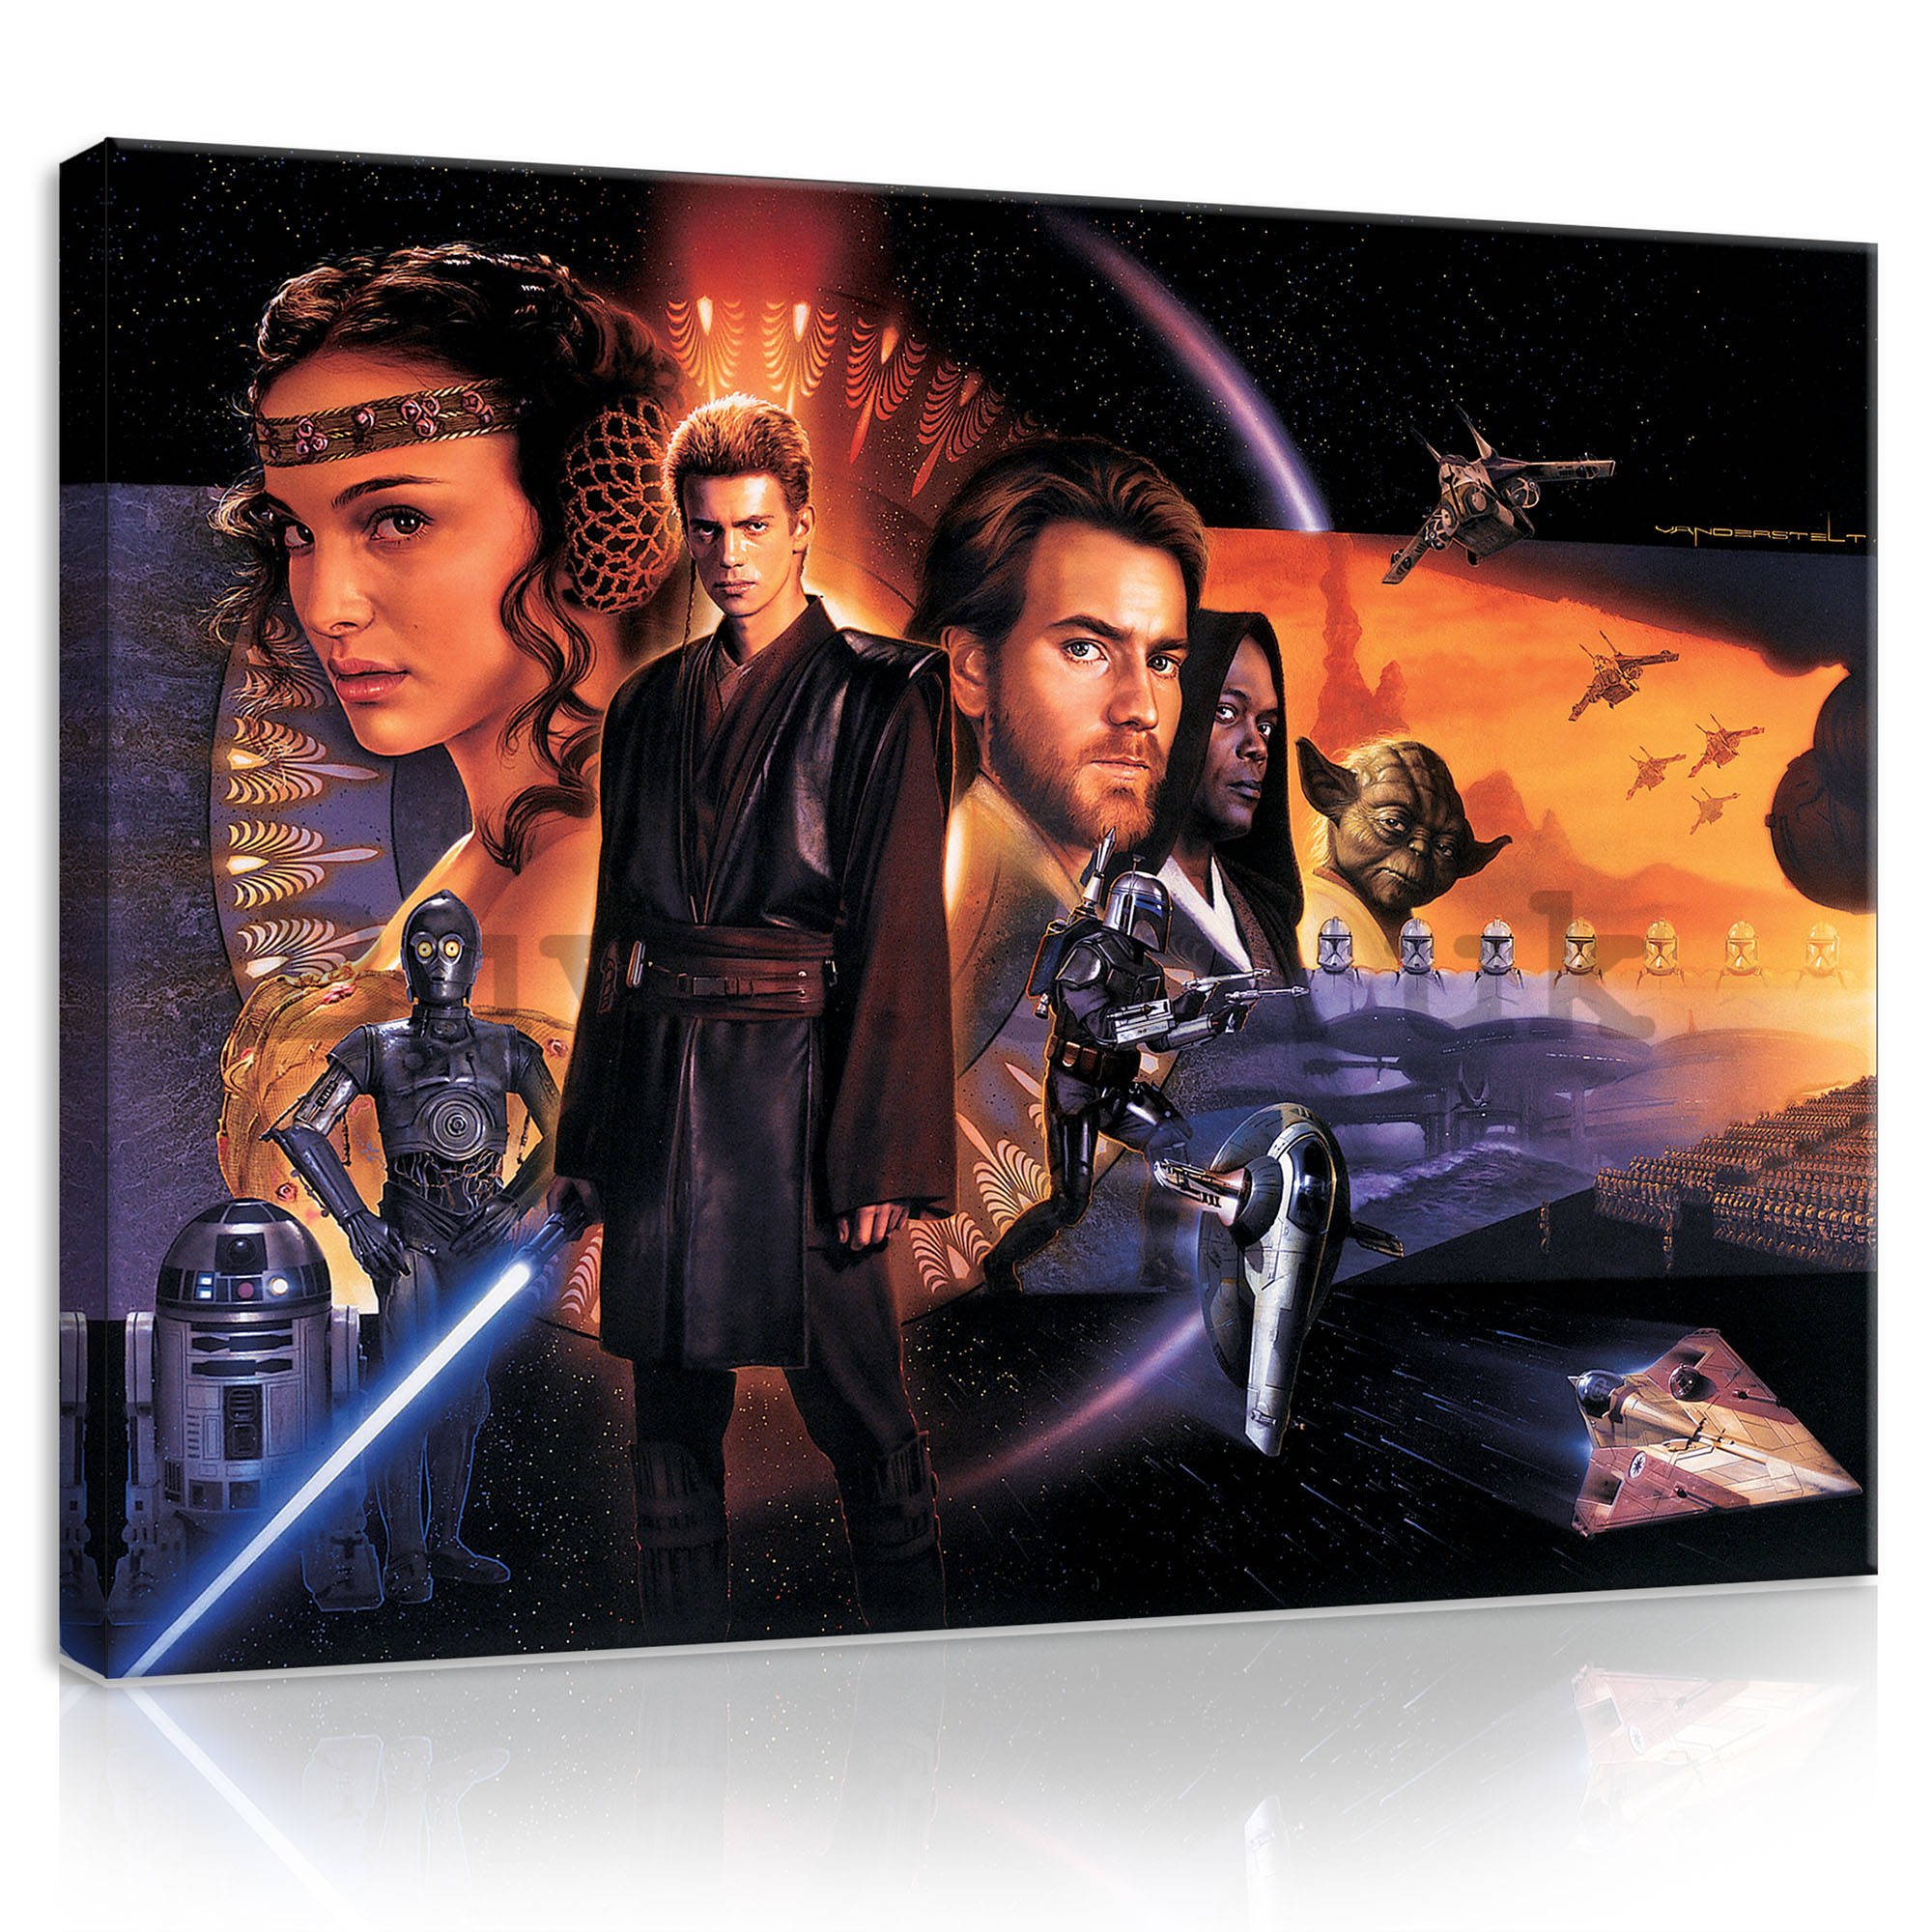 Painting on canvas: Star Wars Attack of the Clones (Poster) - 100x75 cm